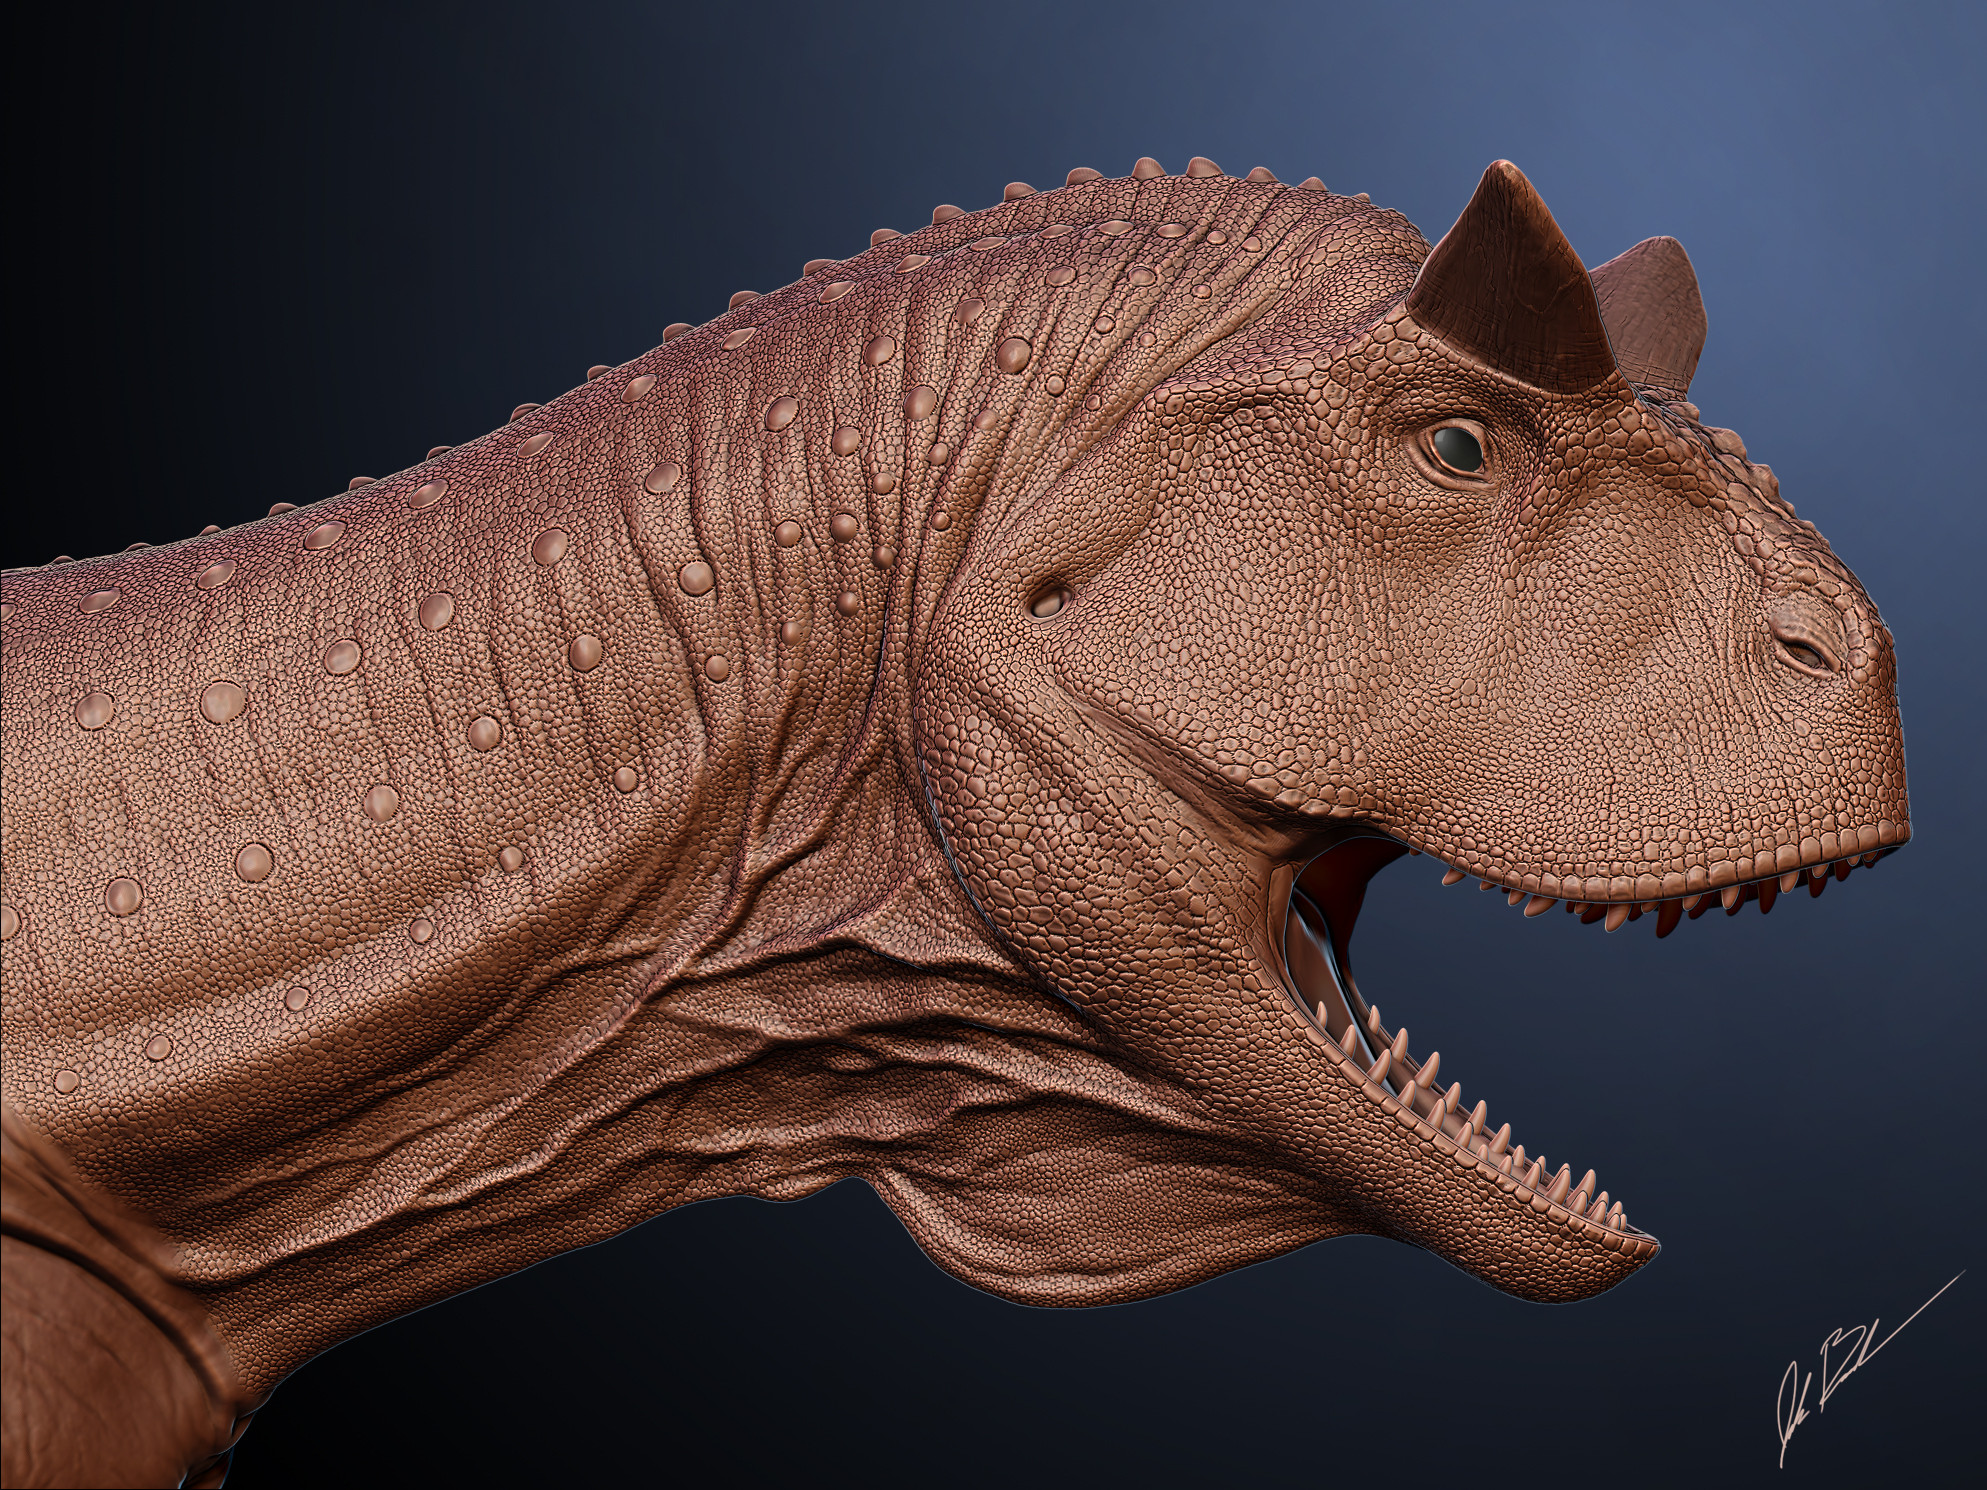 Early WIP image, sculpting in the scales on the face and neck.